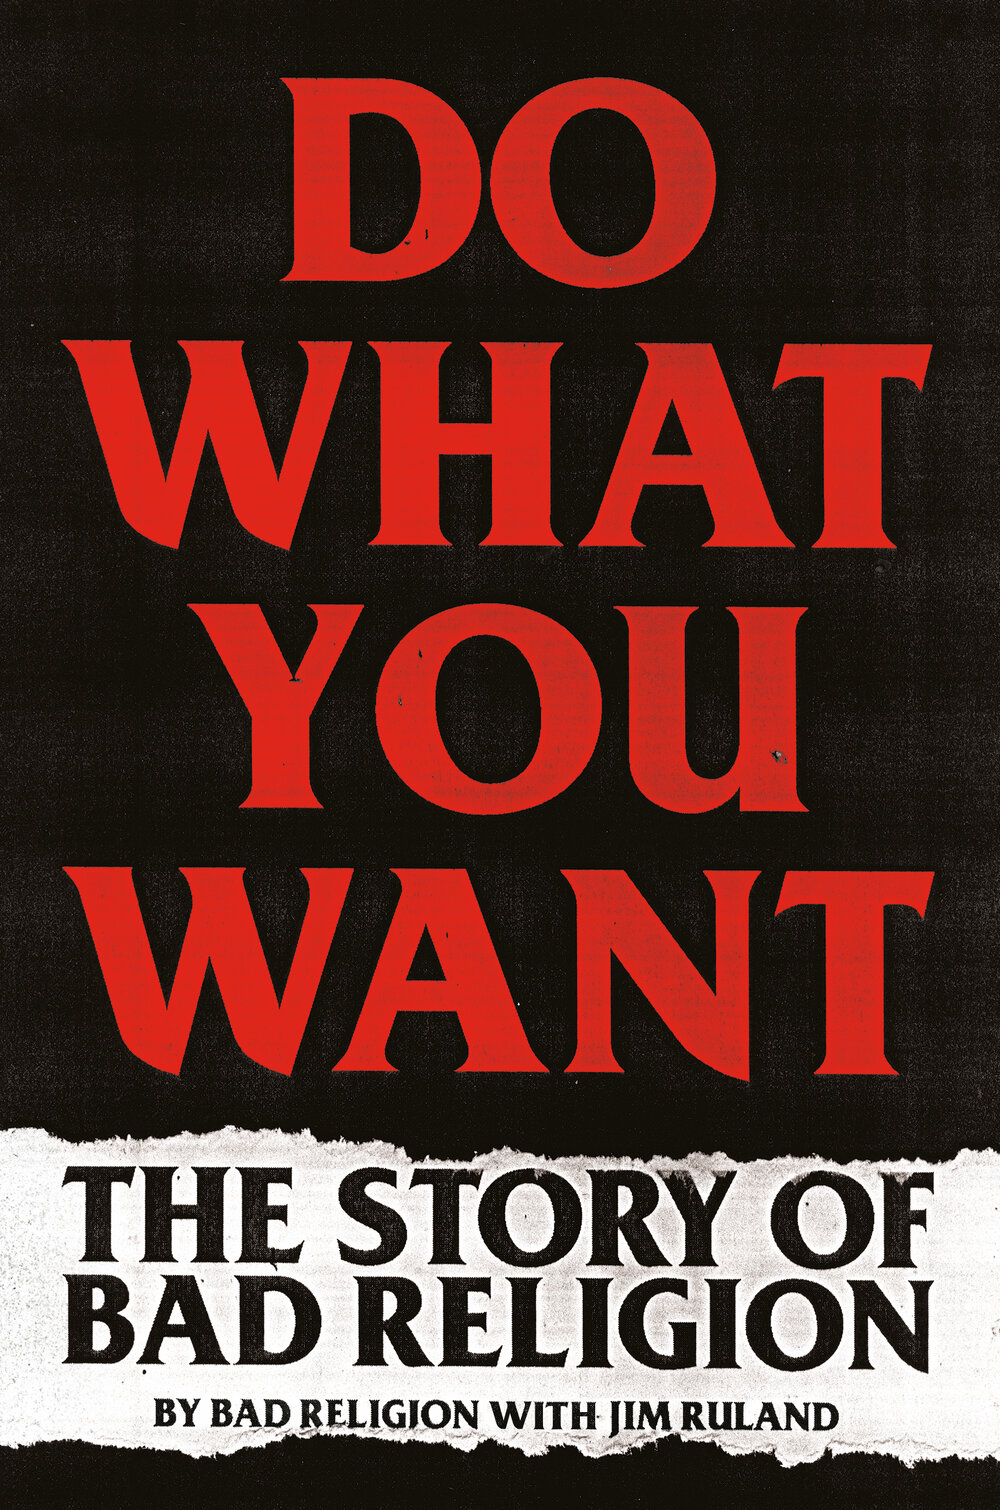 Do What You Want: The Story of Bad Religion by Bad Religion with Jim Ruland